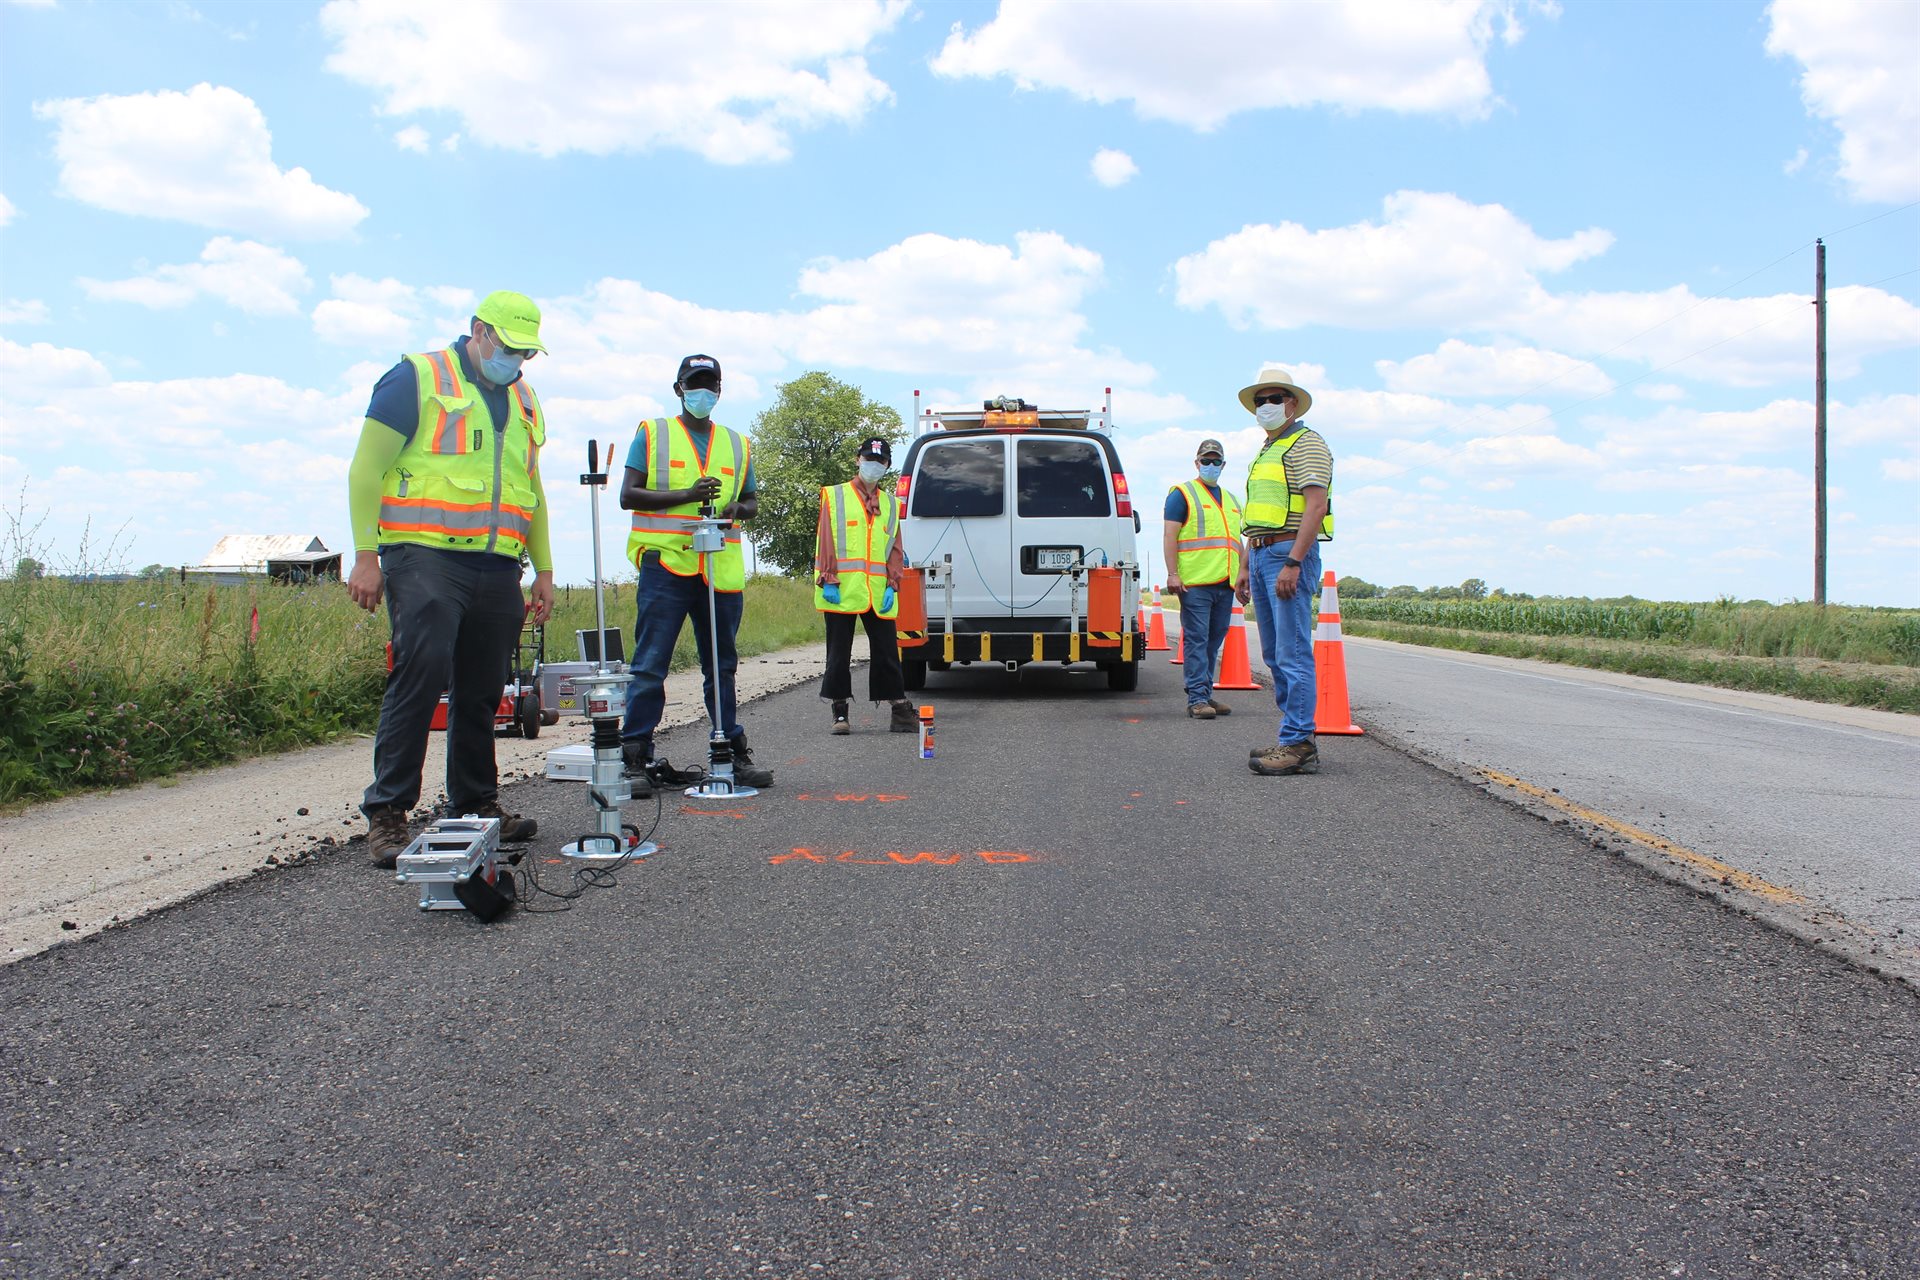 The research team uses an asphalt lightweight deflectometer, a soils/granular lightweight deflectometer and ground-penetrating radar attached to a vehicle to measure pavement density. Ground-penetrating radar, a technique similar to the radar system used to detect airplanes, sends electromagnetic waves into pavement to detect different materials, including water.